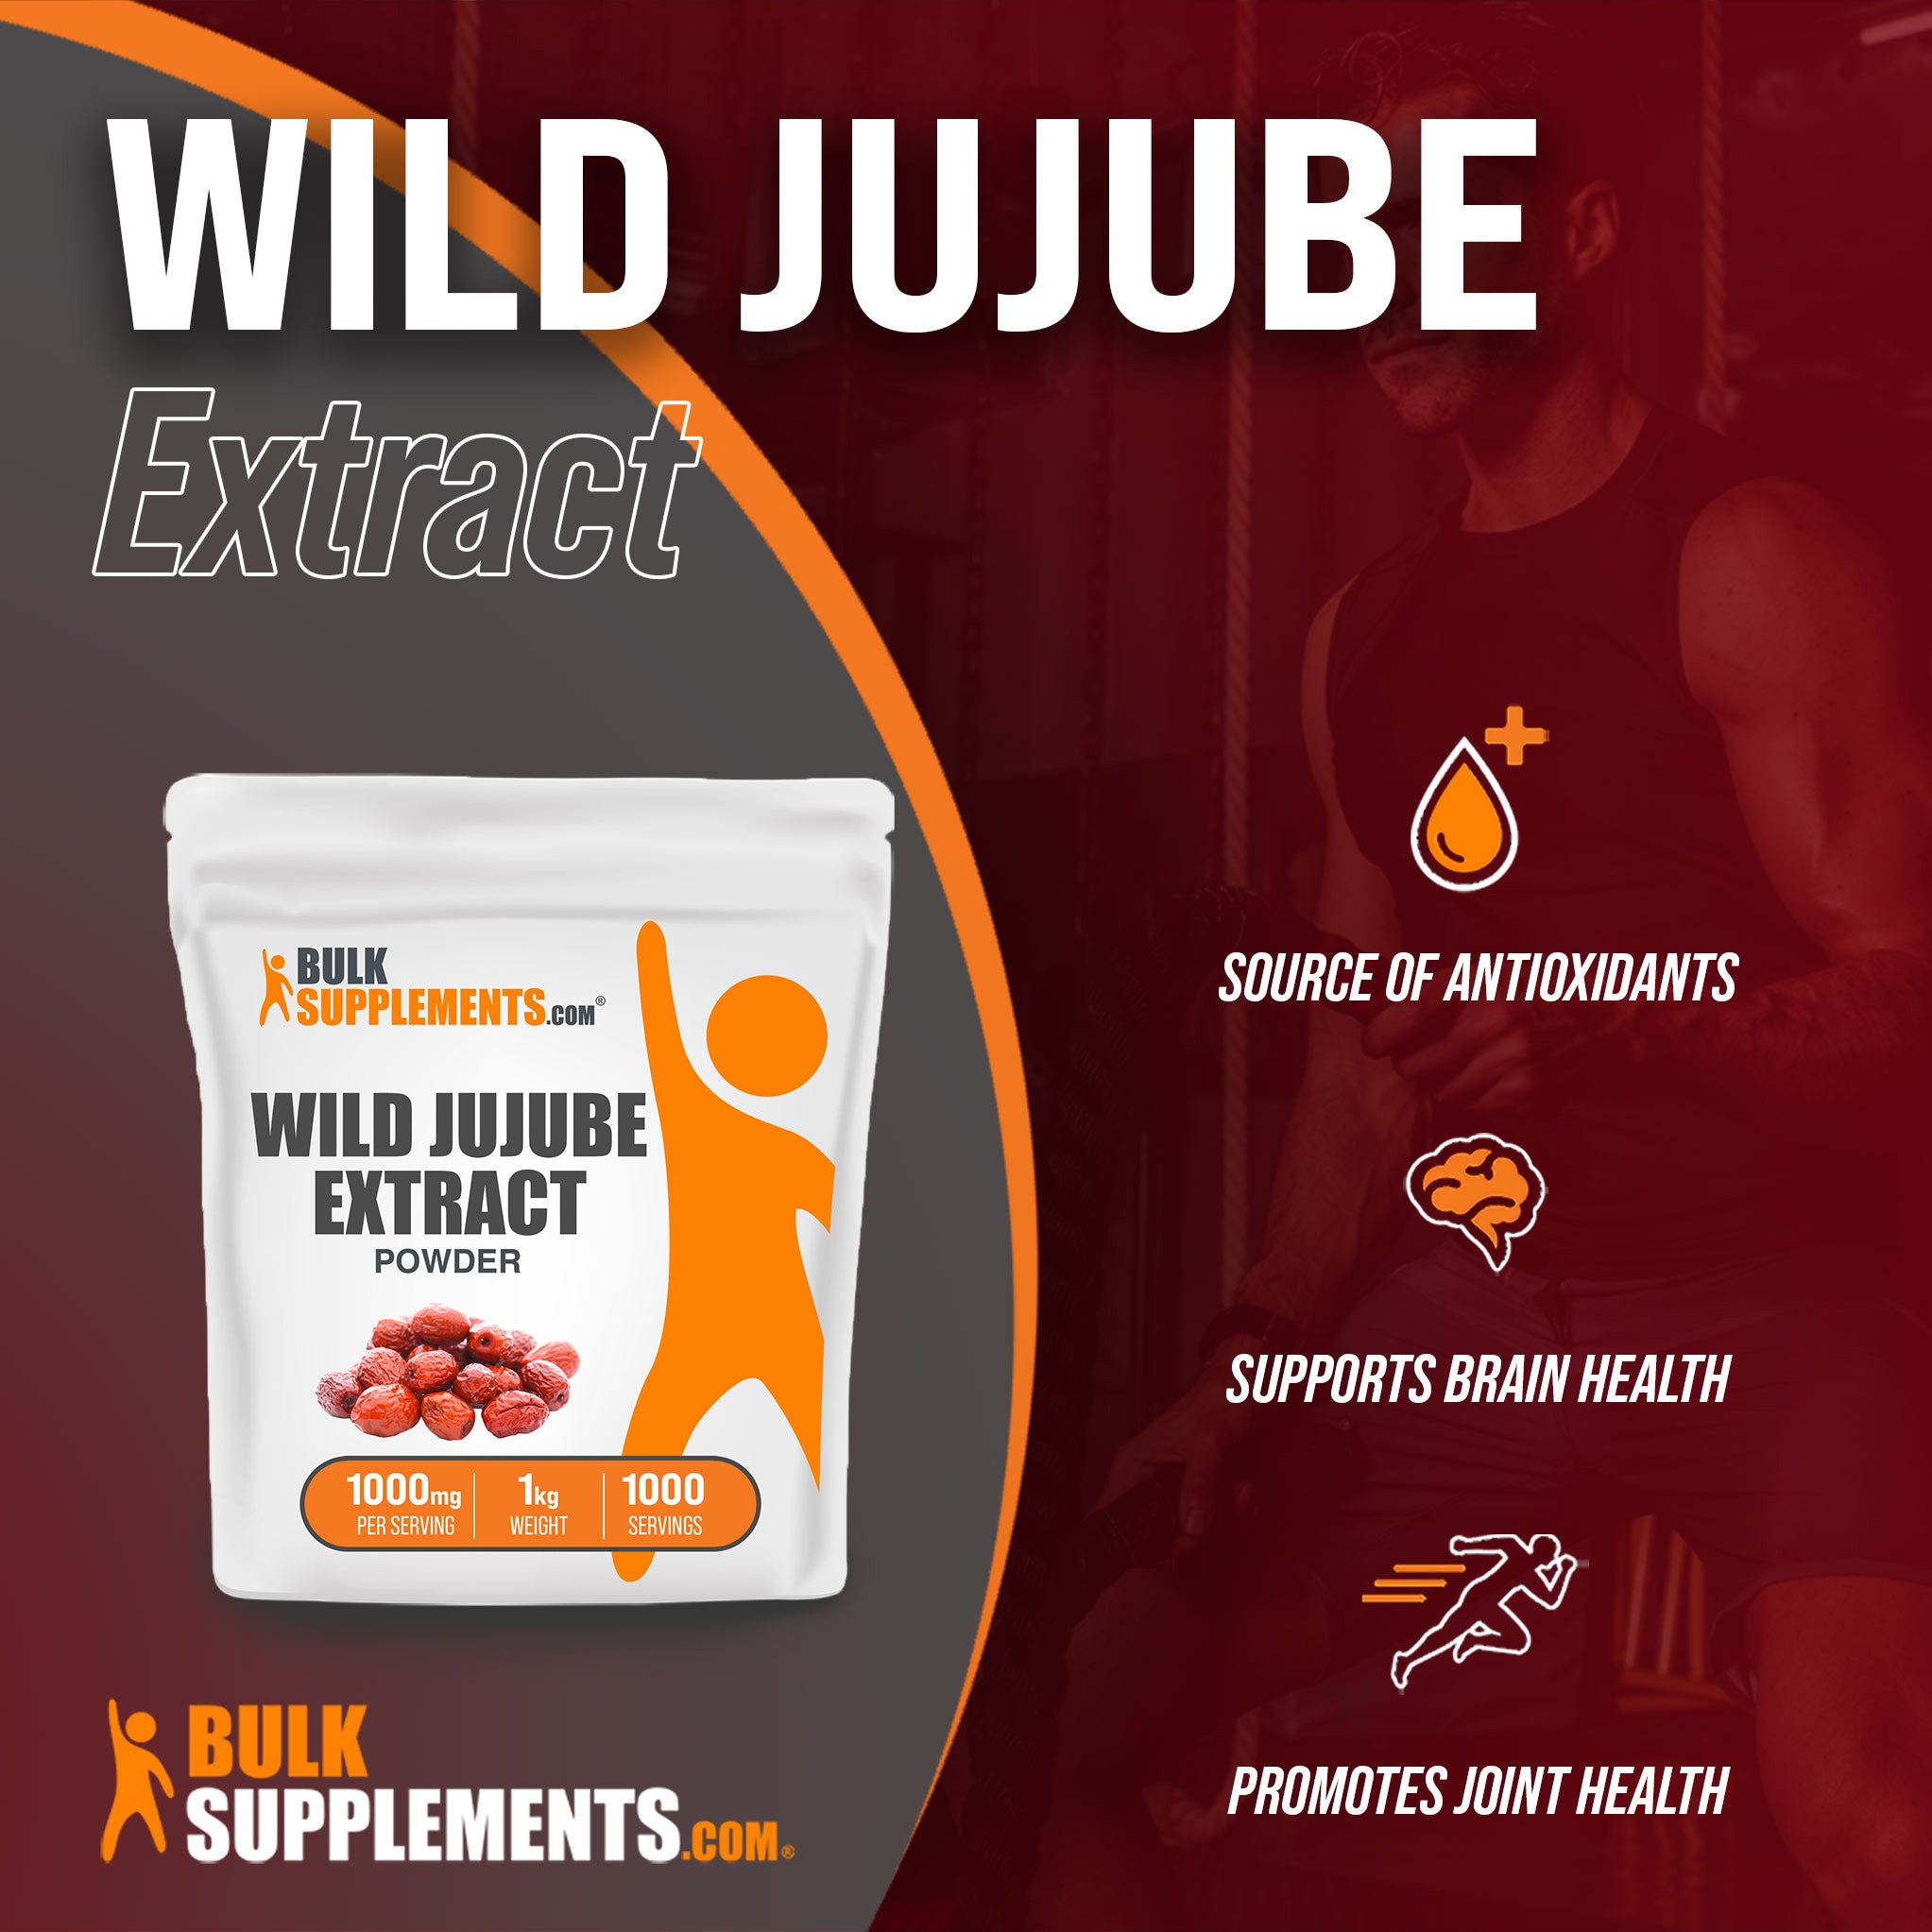 Benefits of Wild Jujube Extract: source of antioxidants, supports brain health, promotes joint health